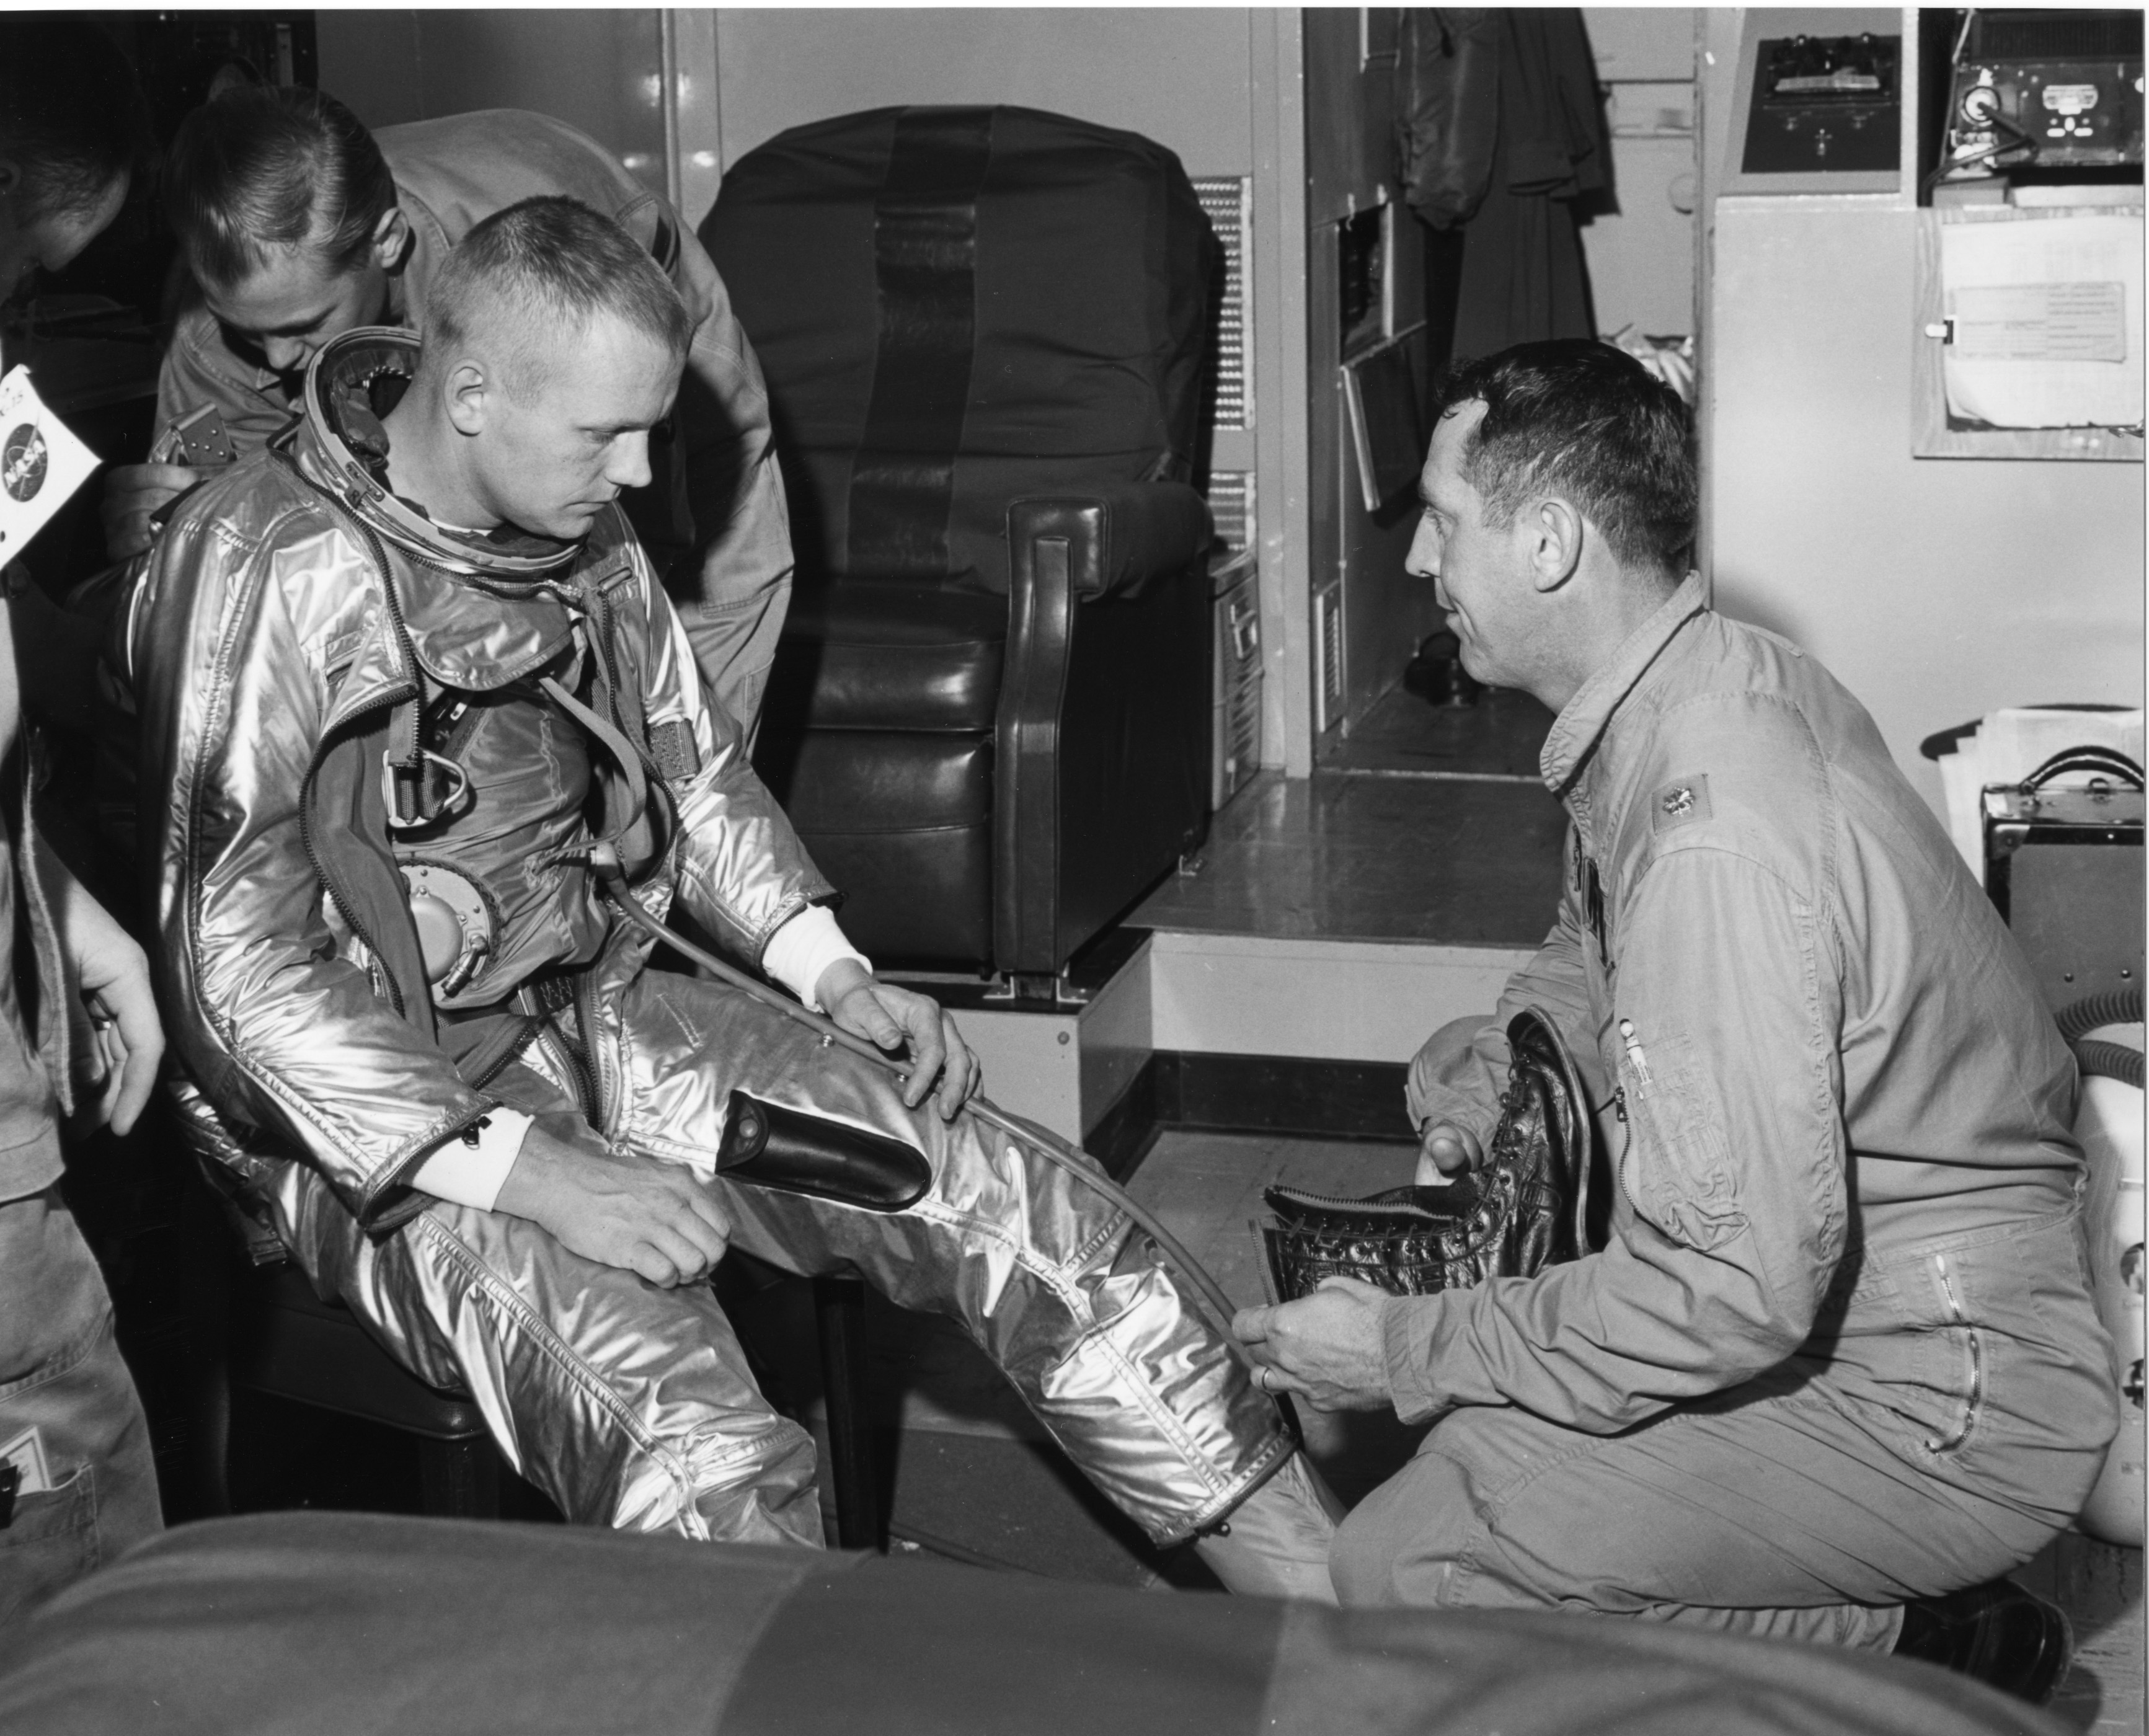 NASA test pilot Neil A. Armstrong dons a pressure suit before his first flight in teh North American Aviation X-15 hypersonic research rocketplane, at Edwards AFB, 30 November 1960. (NASA)